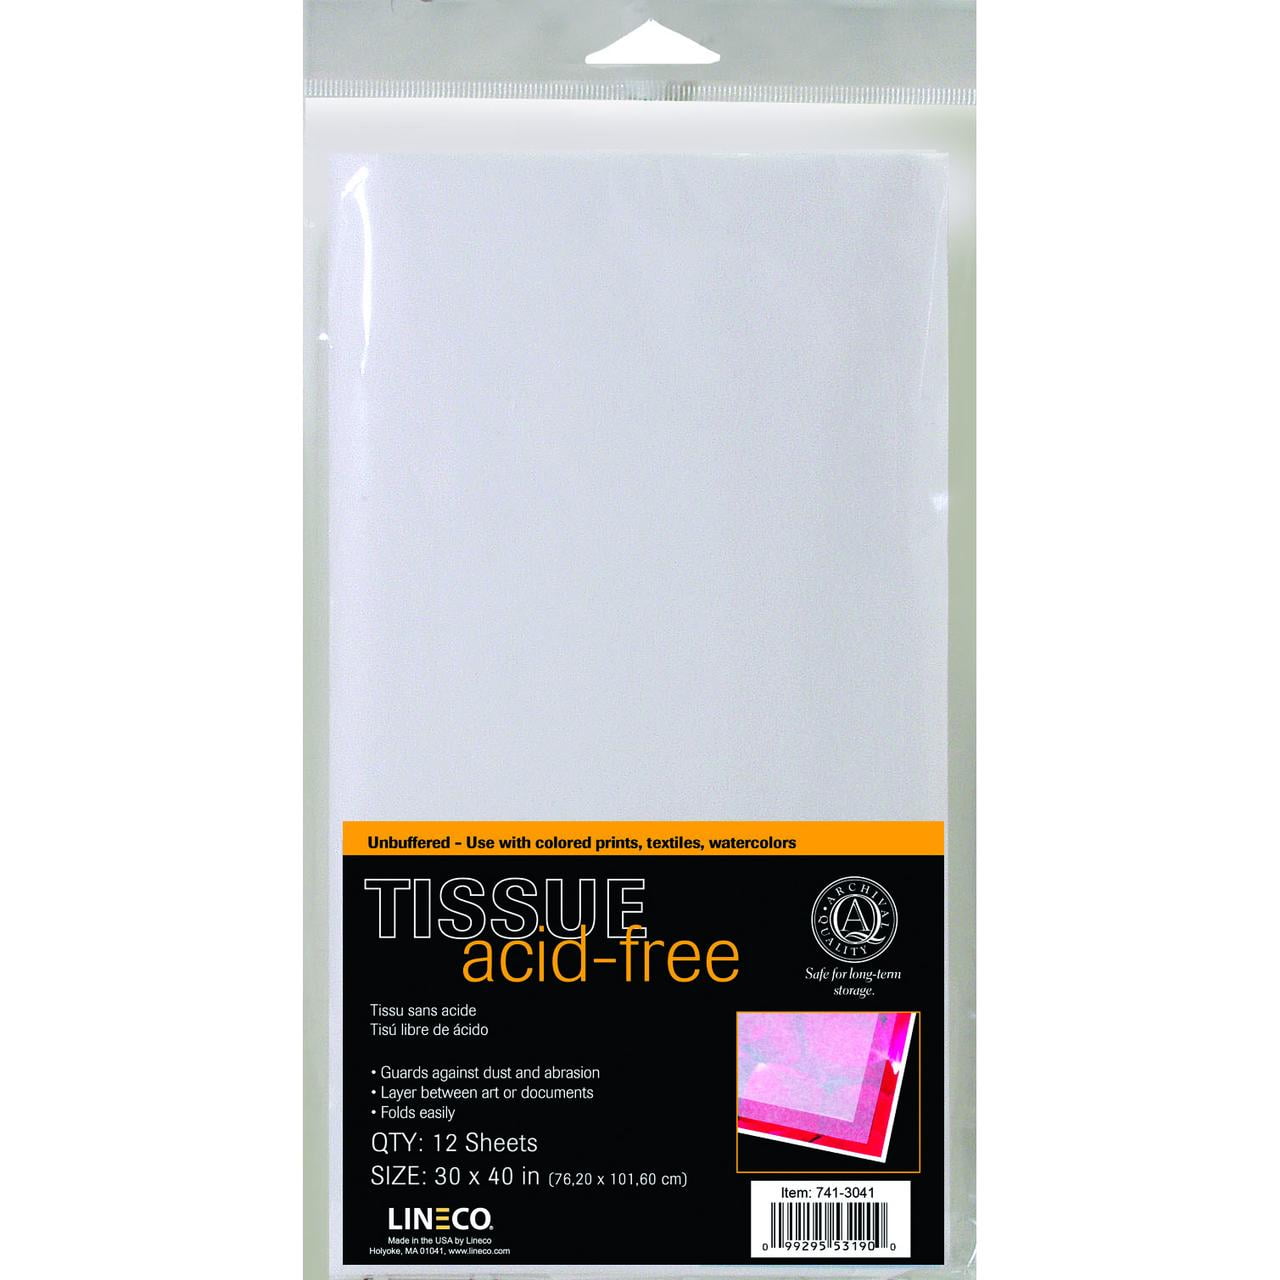 1000 SHEETS OF WHITE ACID FREE TISSUE PAPER 450 x 700 